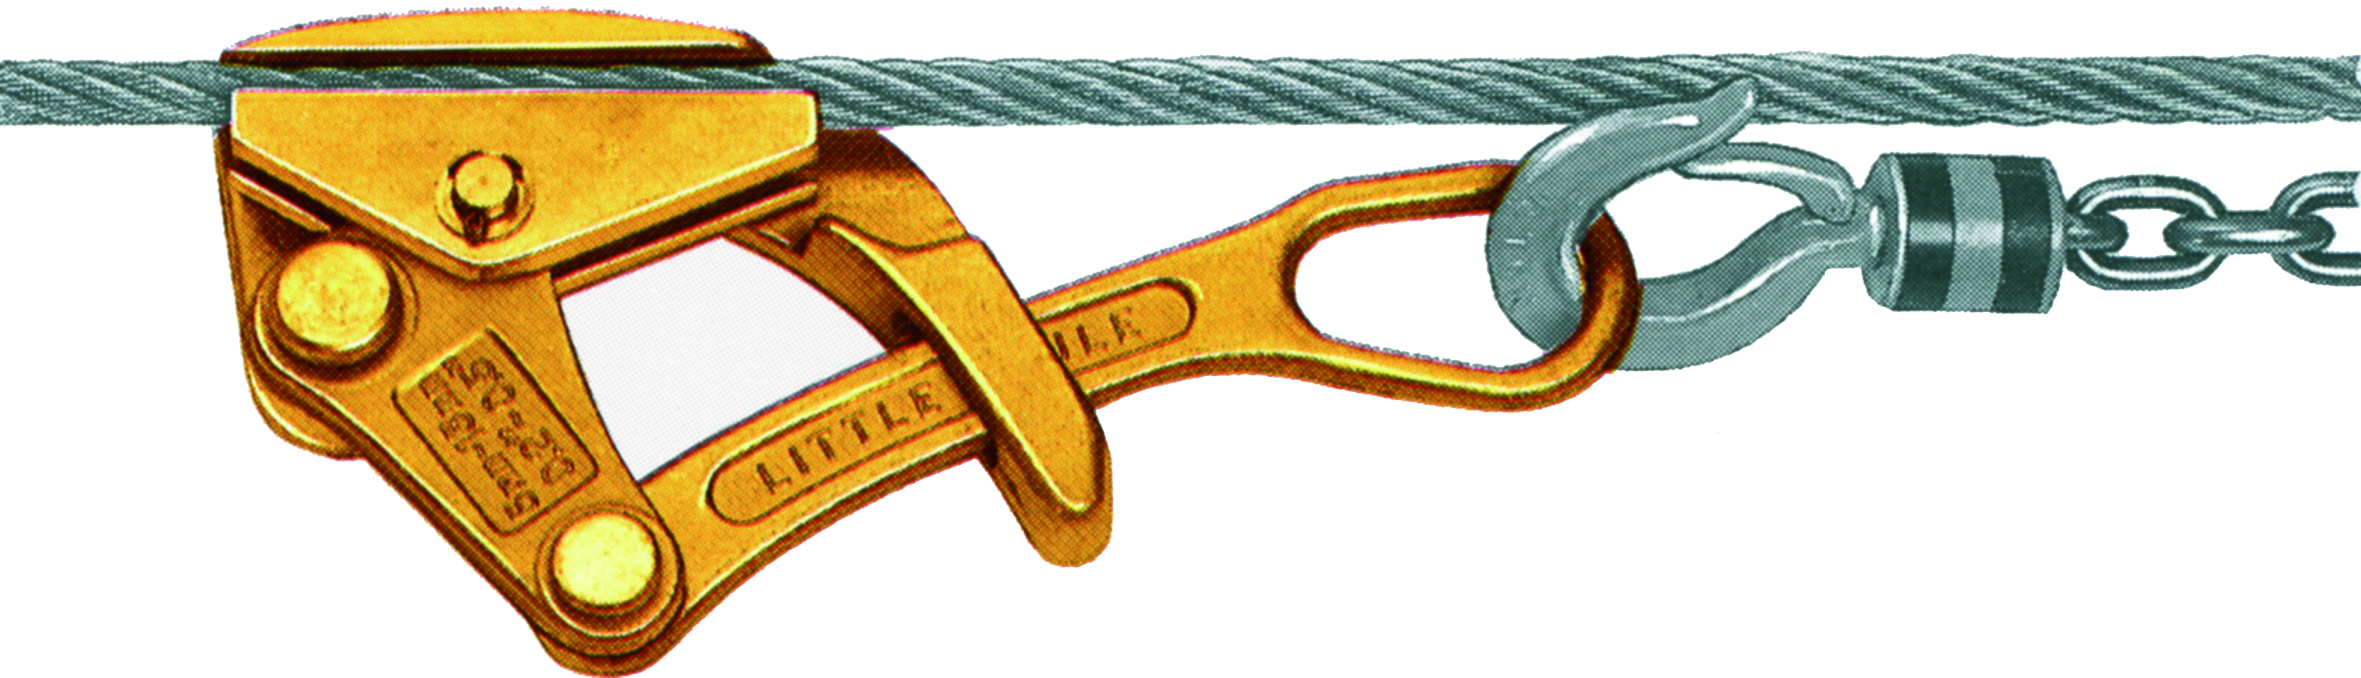 Pince_serre-cable_Little_Mule_Yale_-_type_LMG